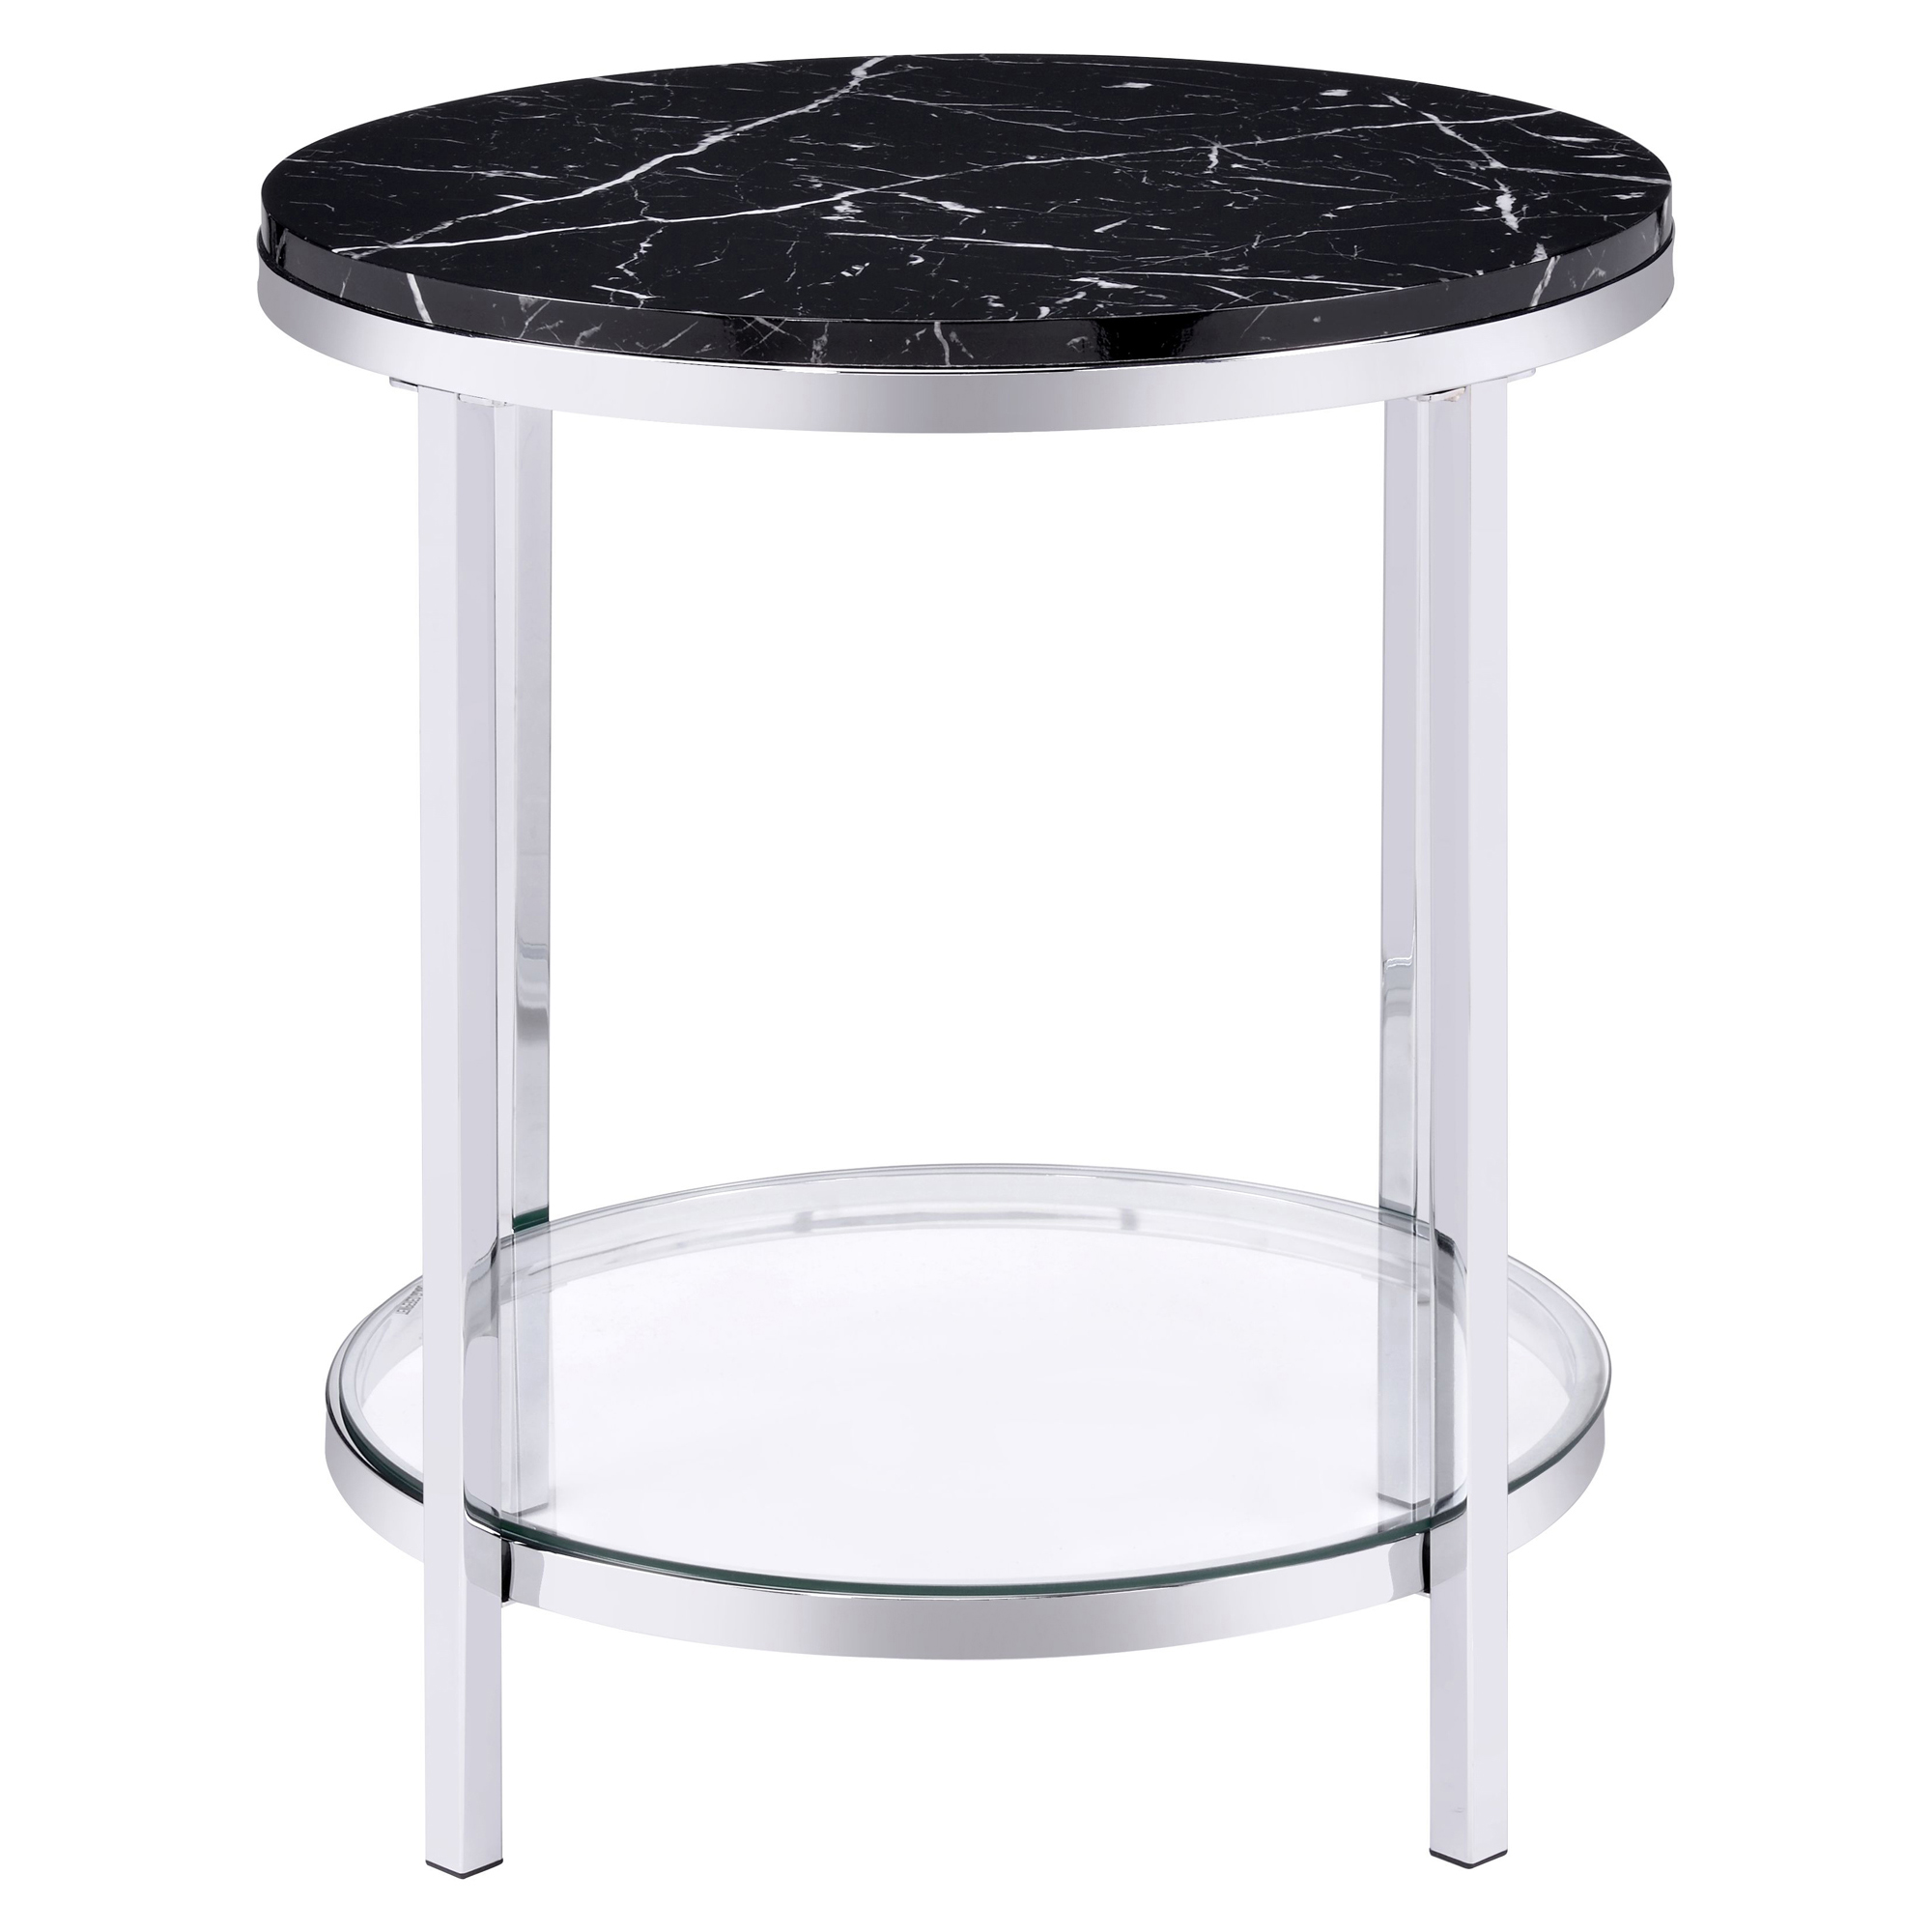 ACME Virlana Round End Table in Black and Chrome - image 2 of 5